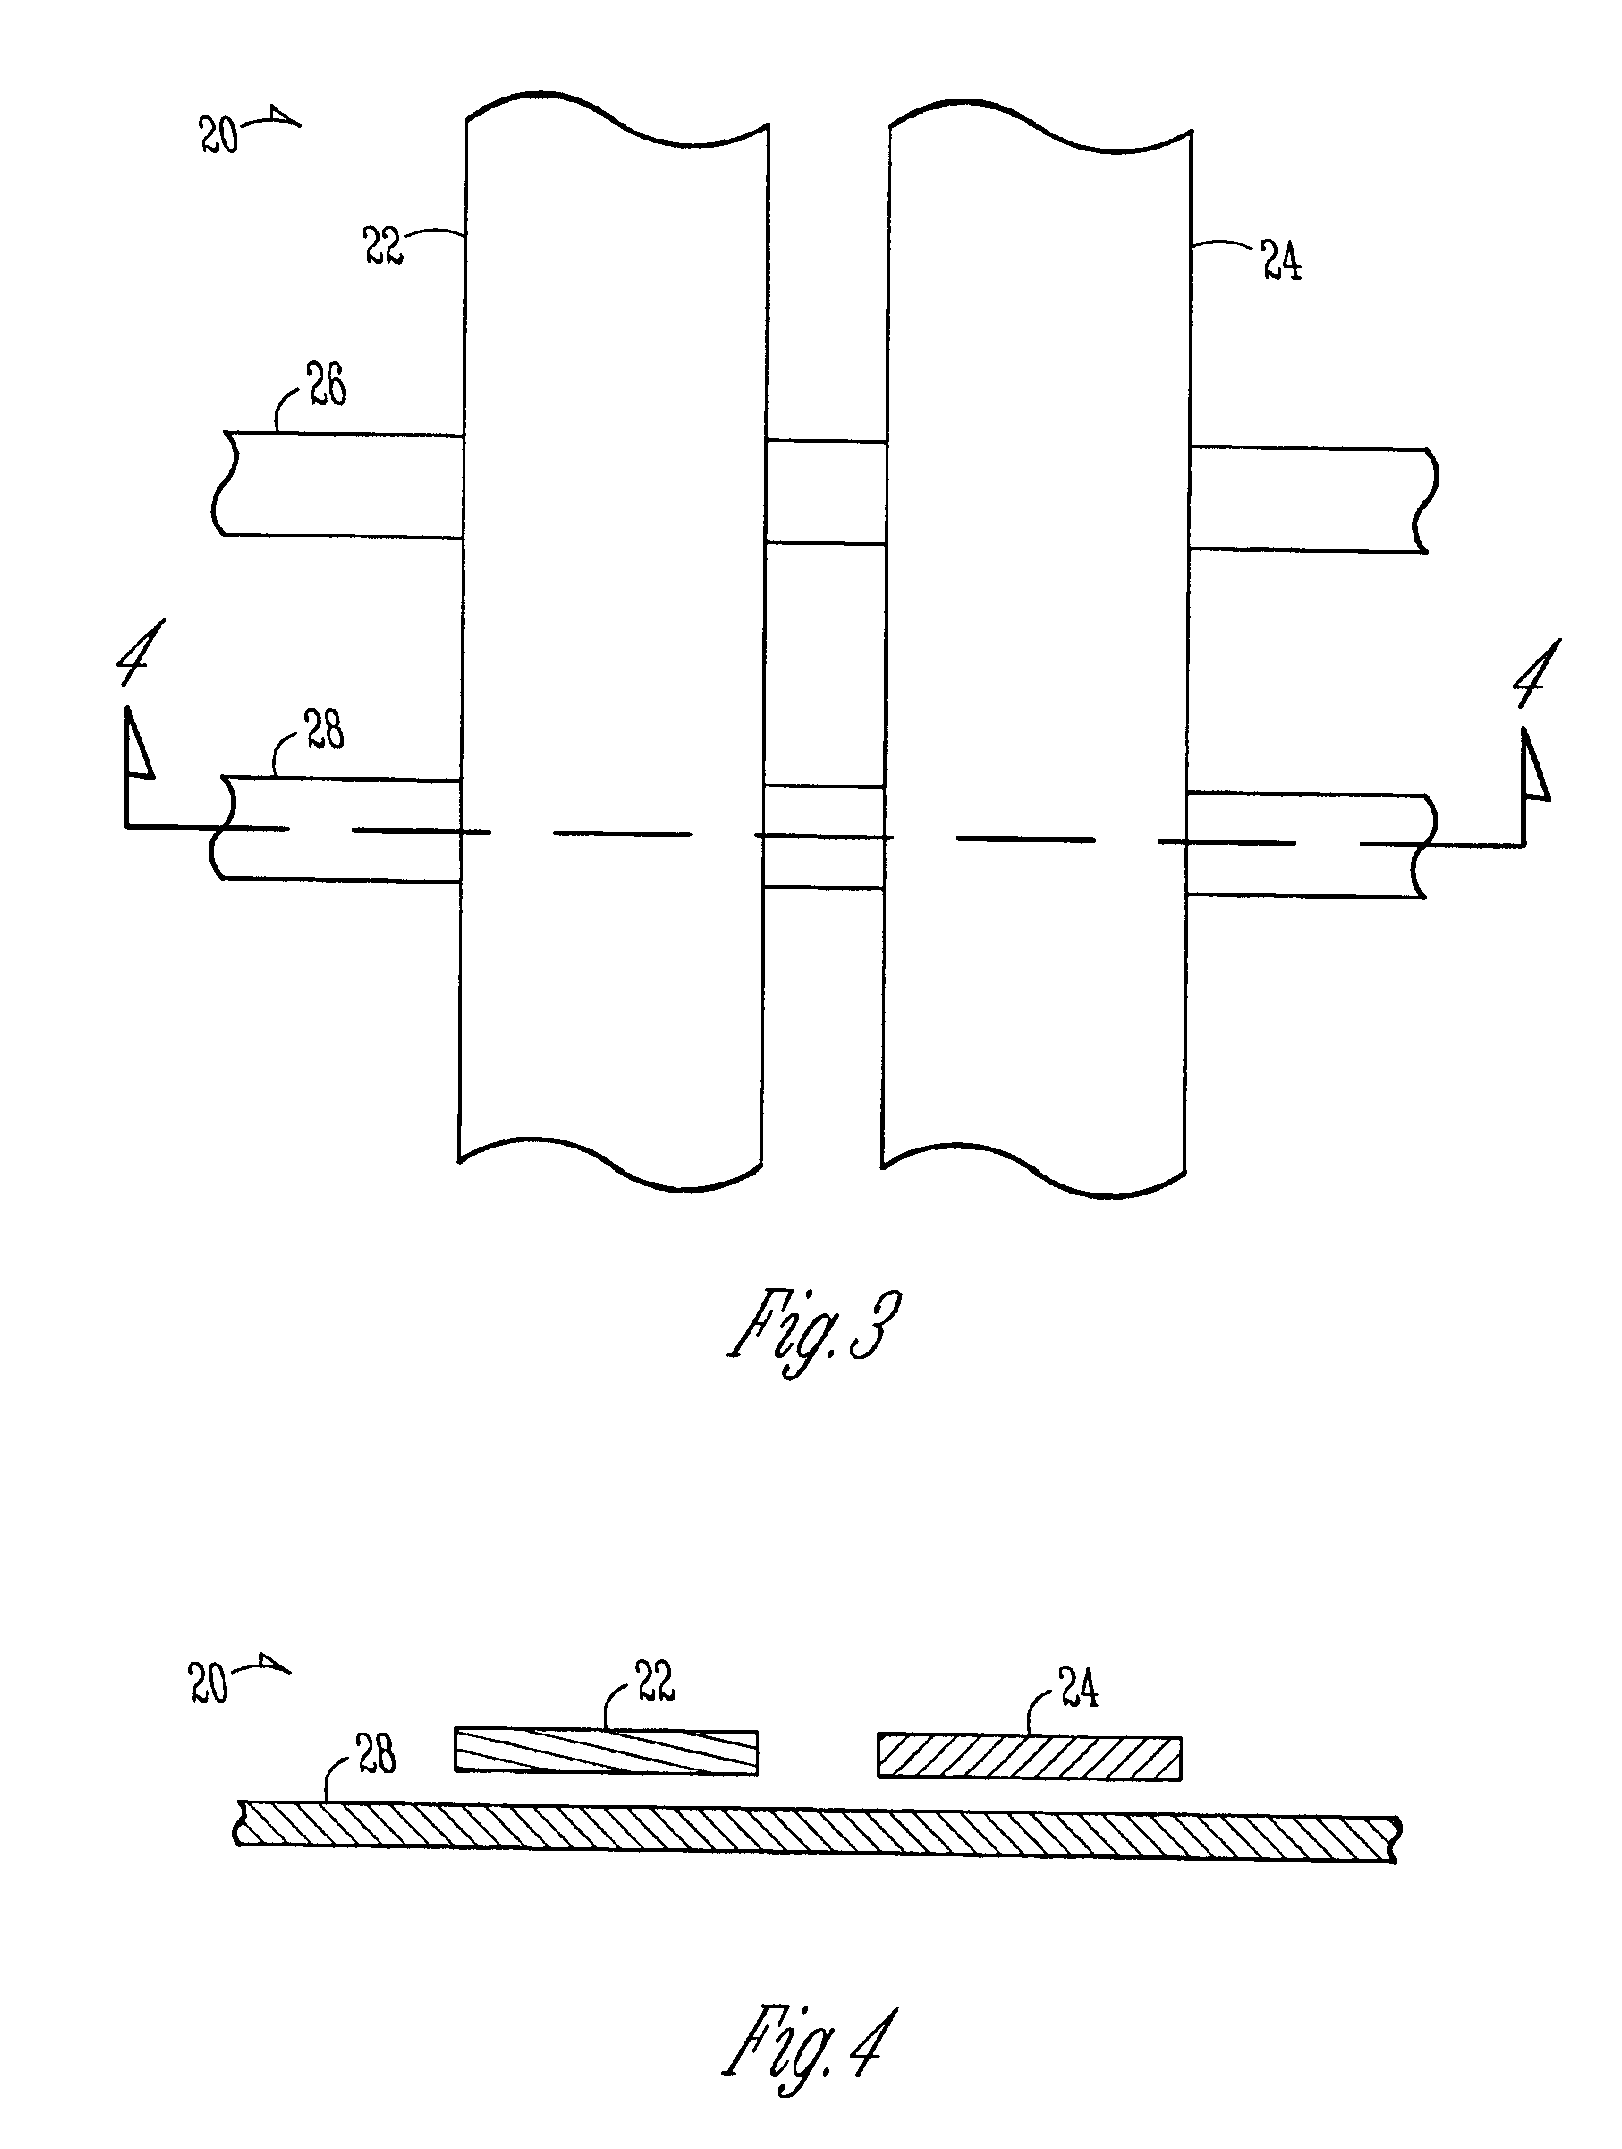 Low loss interconnect structure for use in microelectronic circuits